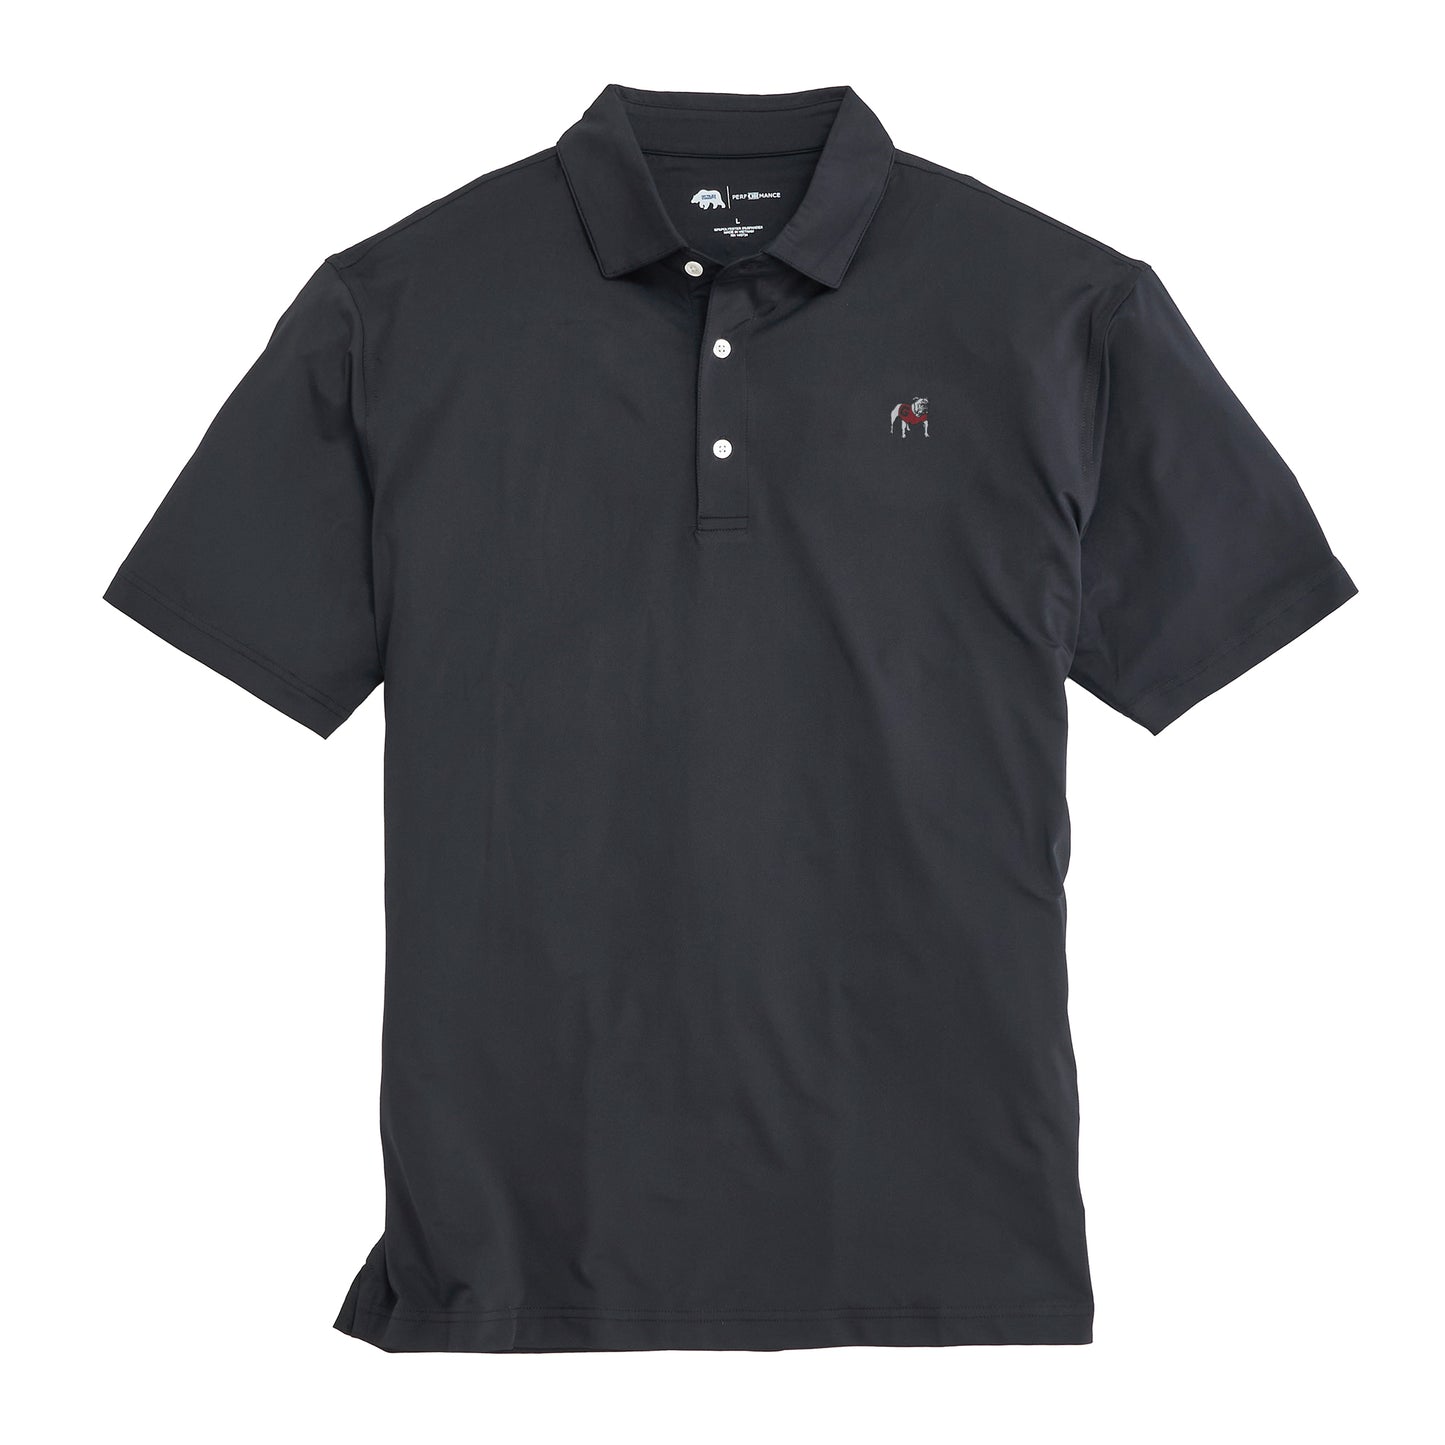 Solid Standing Bulldog Performance Polo – Onward Reserve